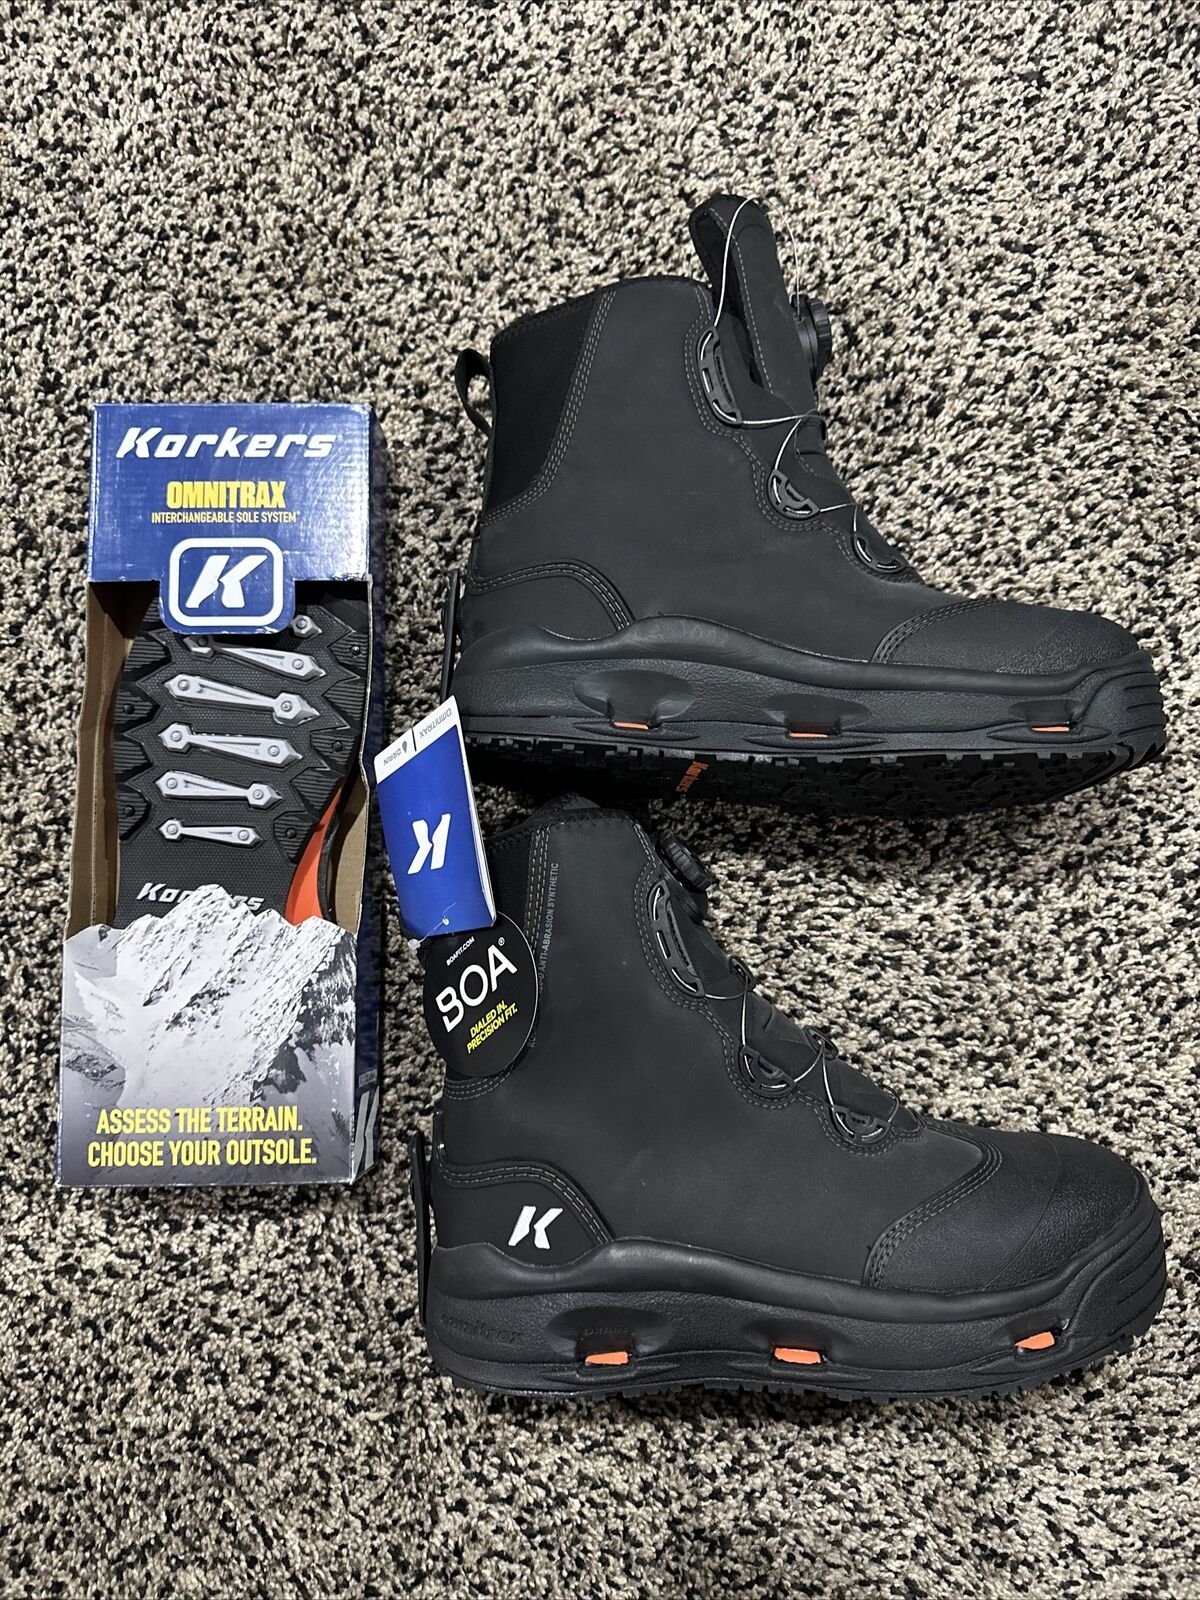 SIZE 12 KORKERS DEVILS CANYON WADING FISHING BOOT STUDDED+ KLING-ON RUBBER SOLES